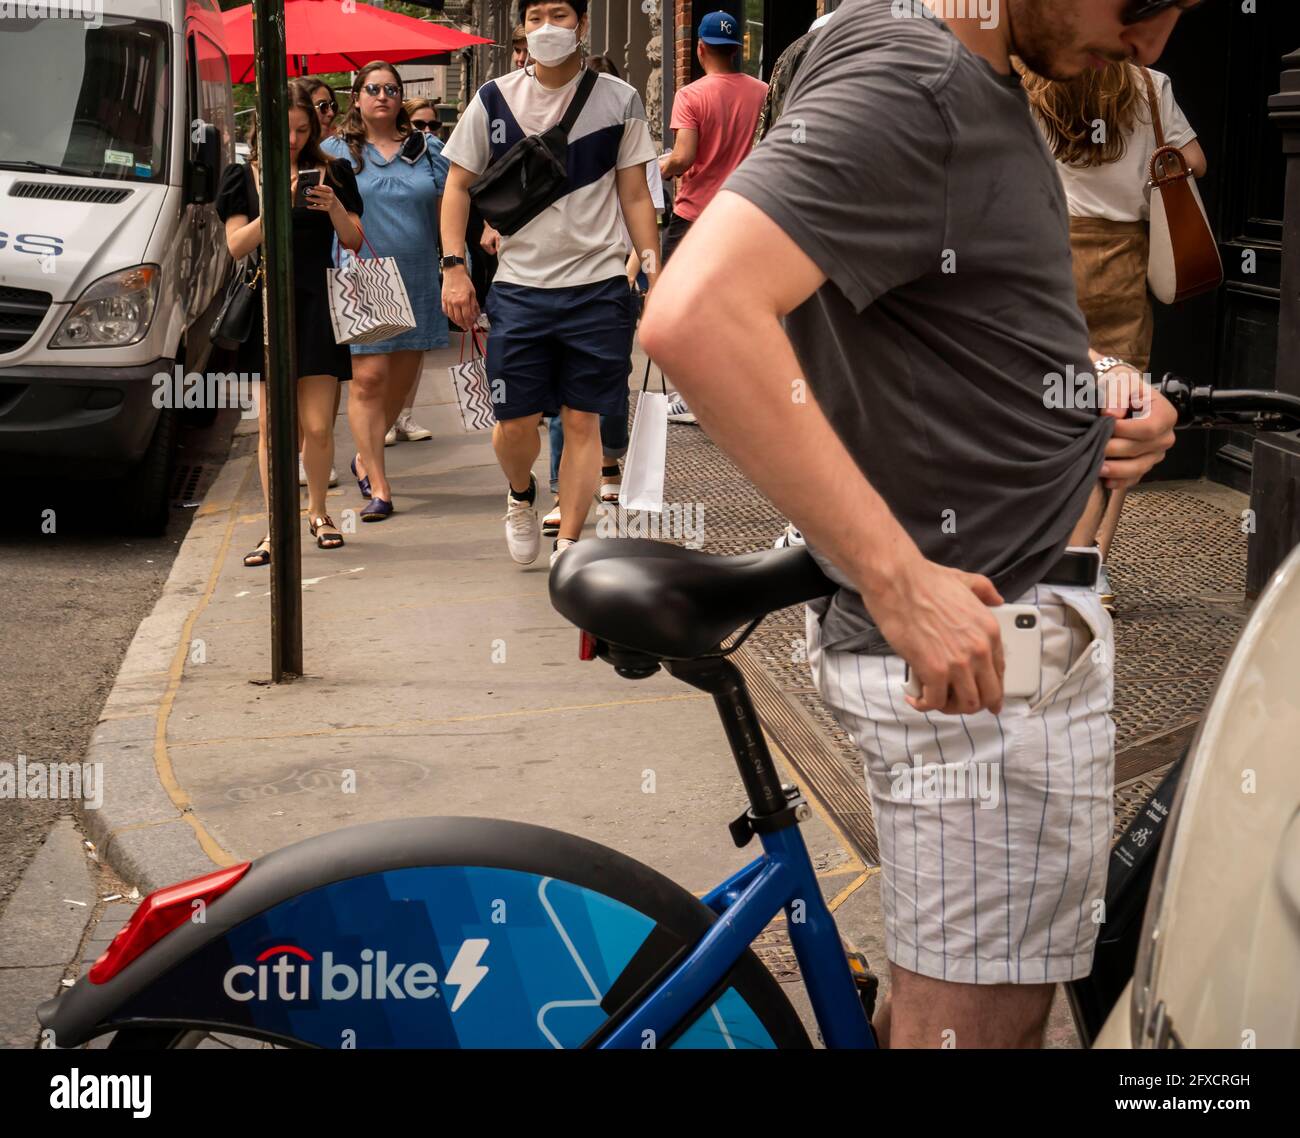 Masked and mask-less people in the Soho neighborhood in New York on Saturday, May 22, 2021. New York has relaxed mask mandates allowing most outdoor activities to be mask free as well as many indoor settings, with caveats. (© Richard B. Levine) Stock Photo